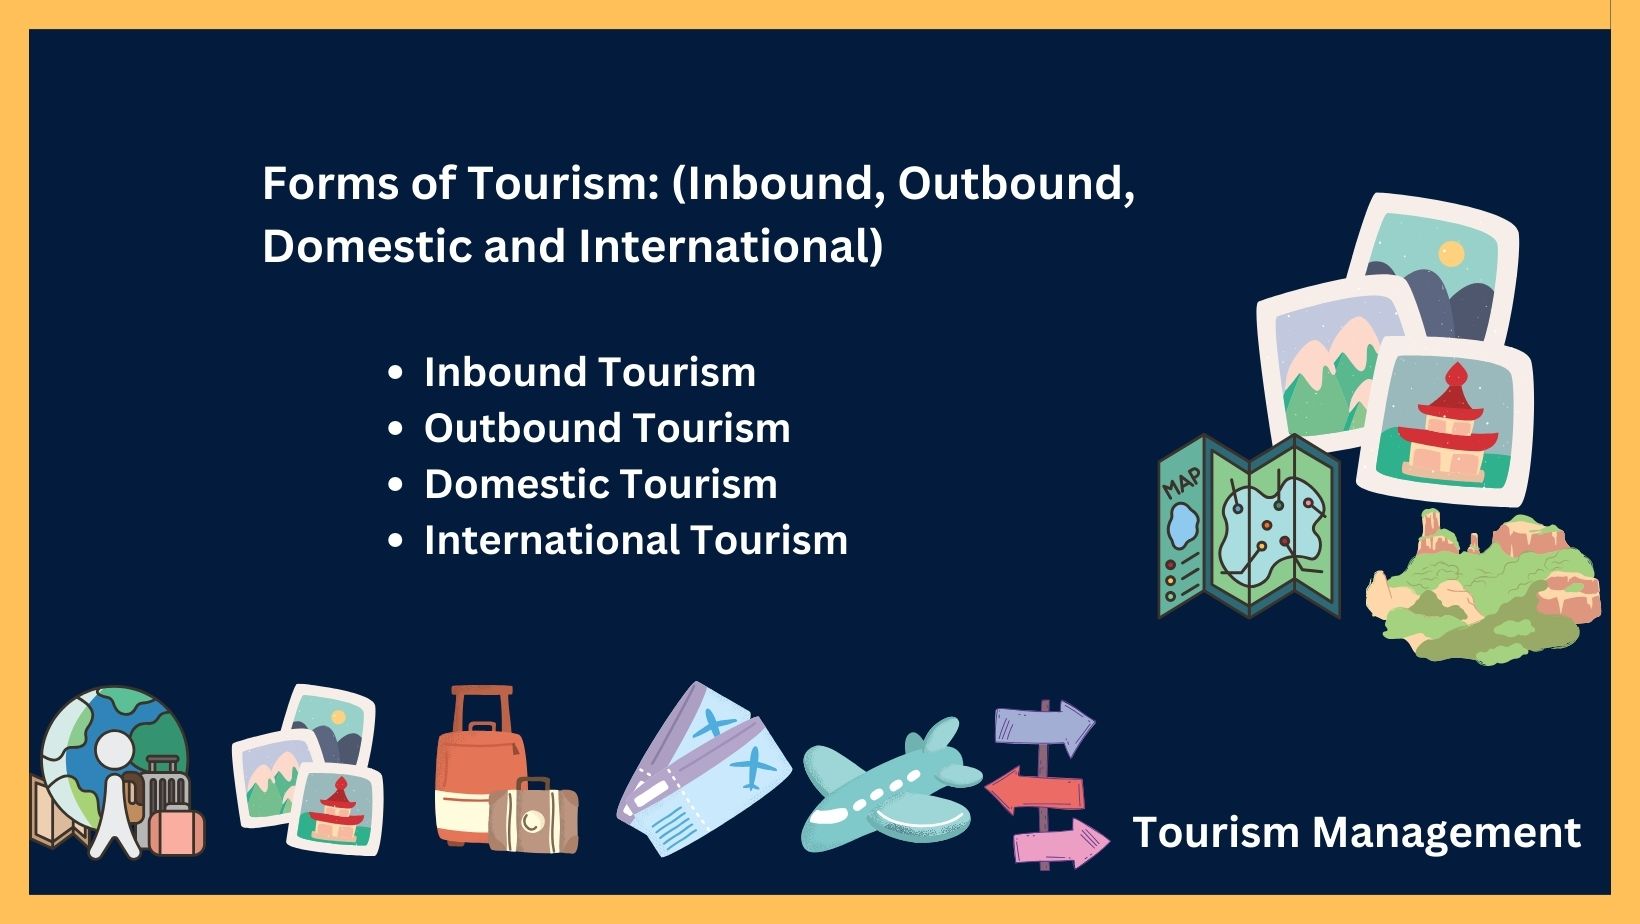 outbound tourism and inbound tourism means